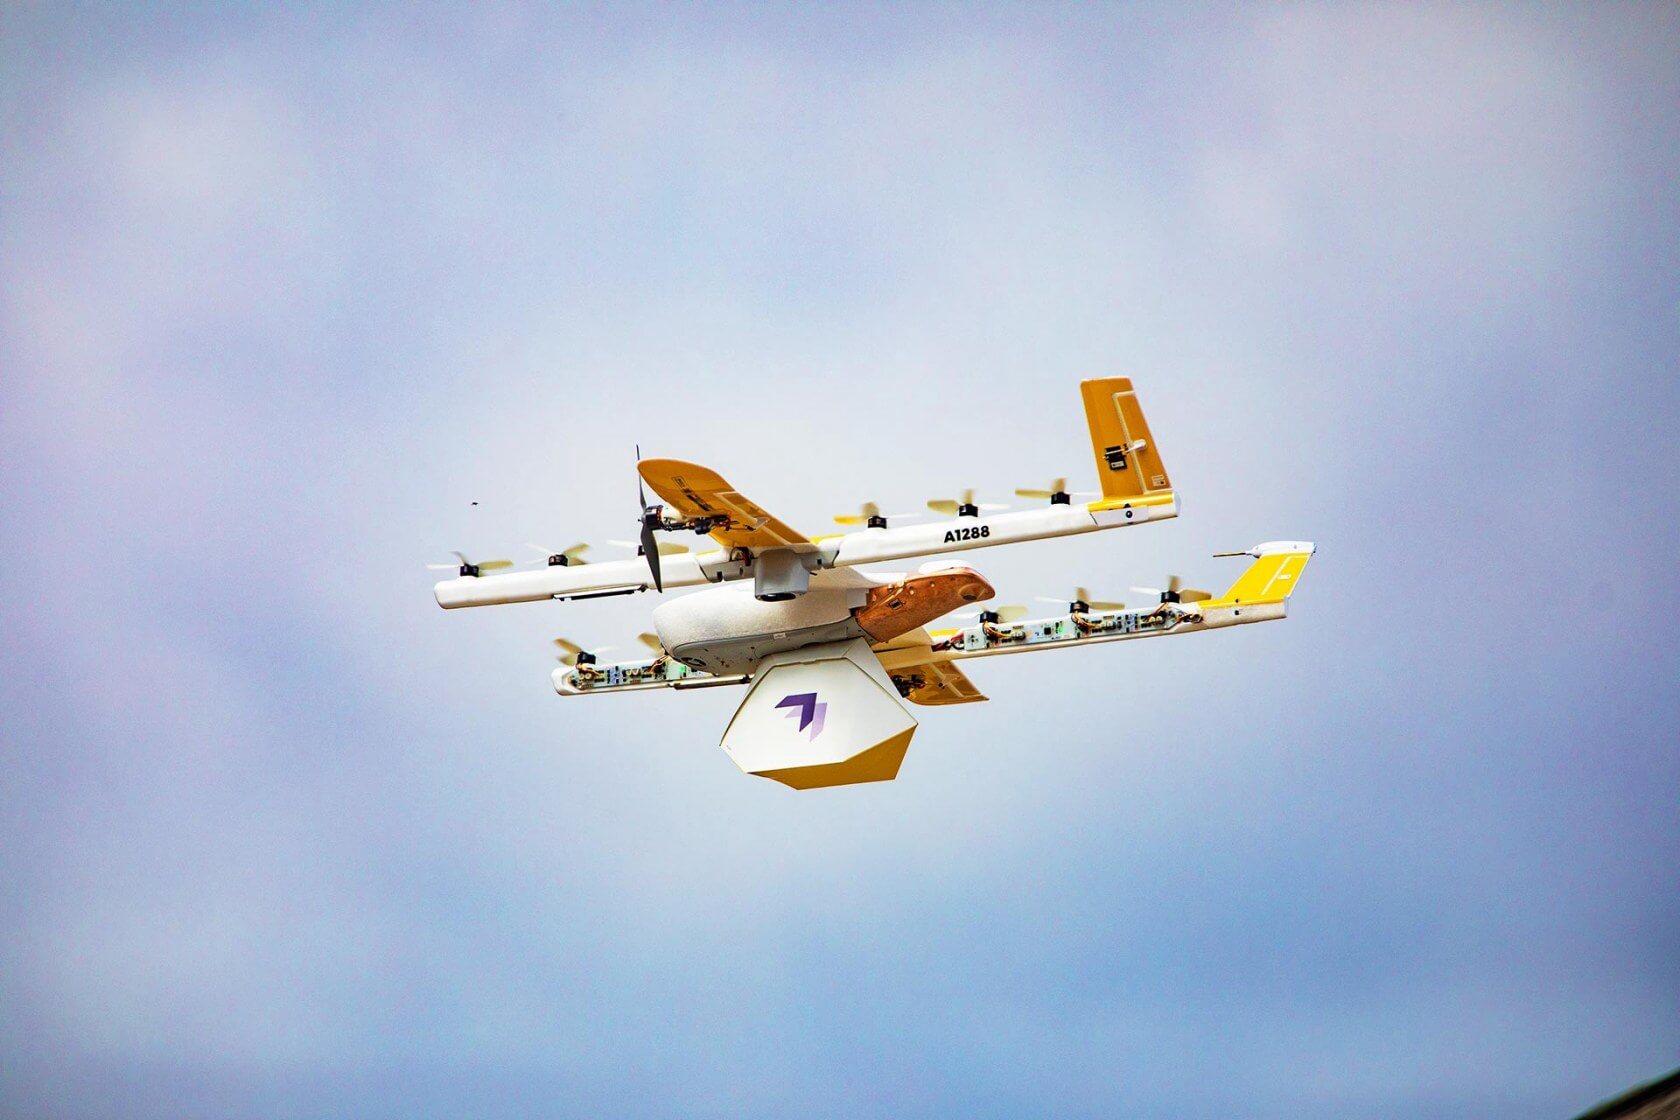 Alphabet's Wing division has launched 'America's first' commercial drone delivery service